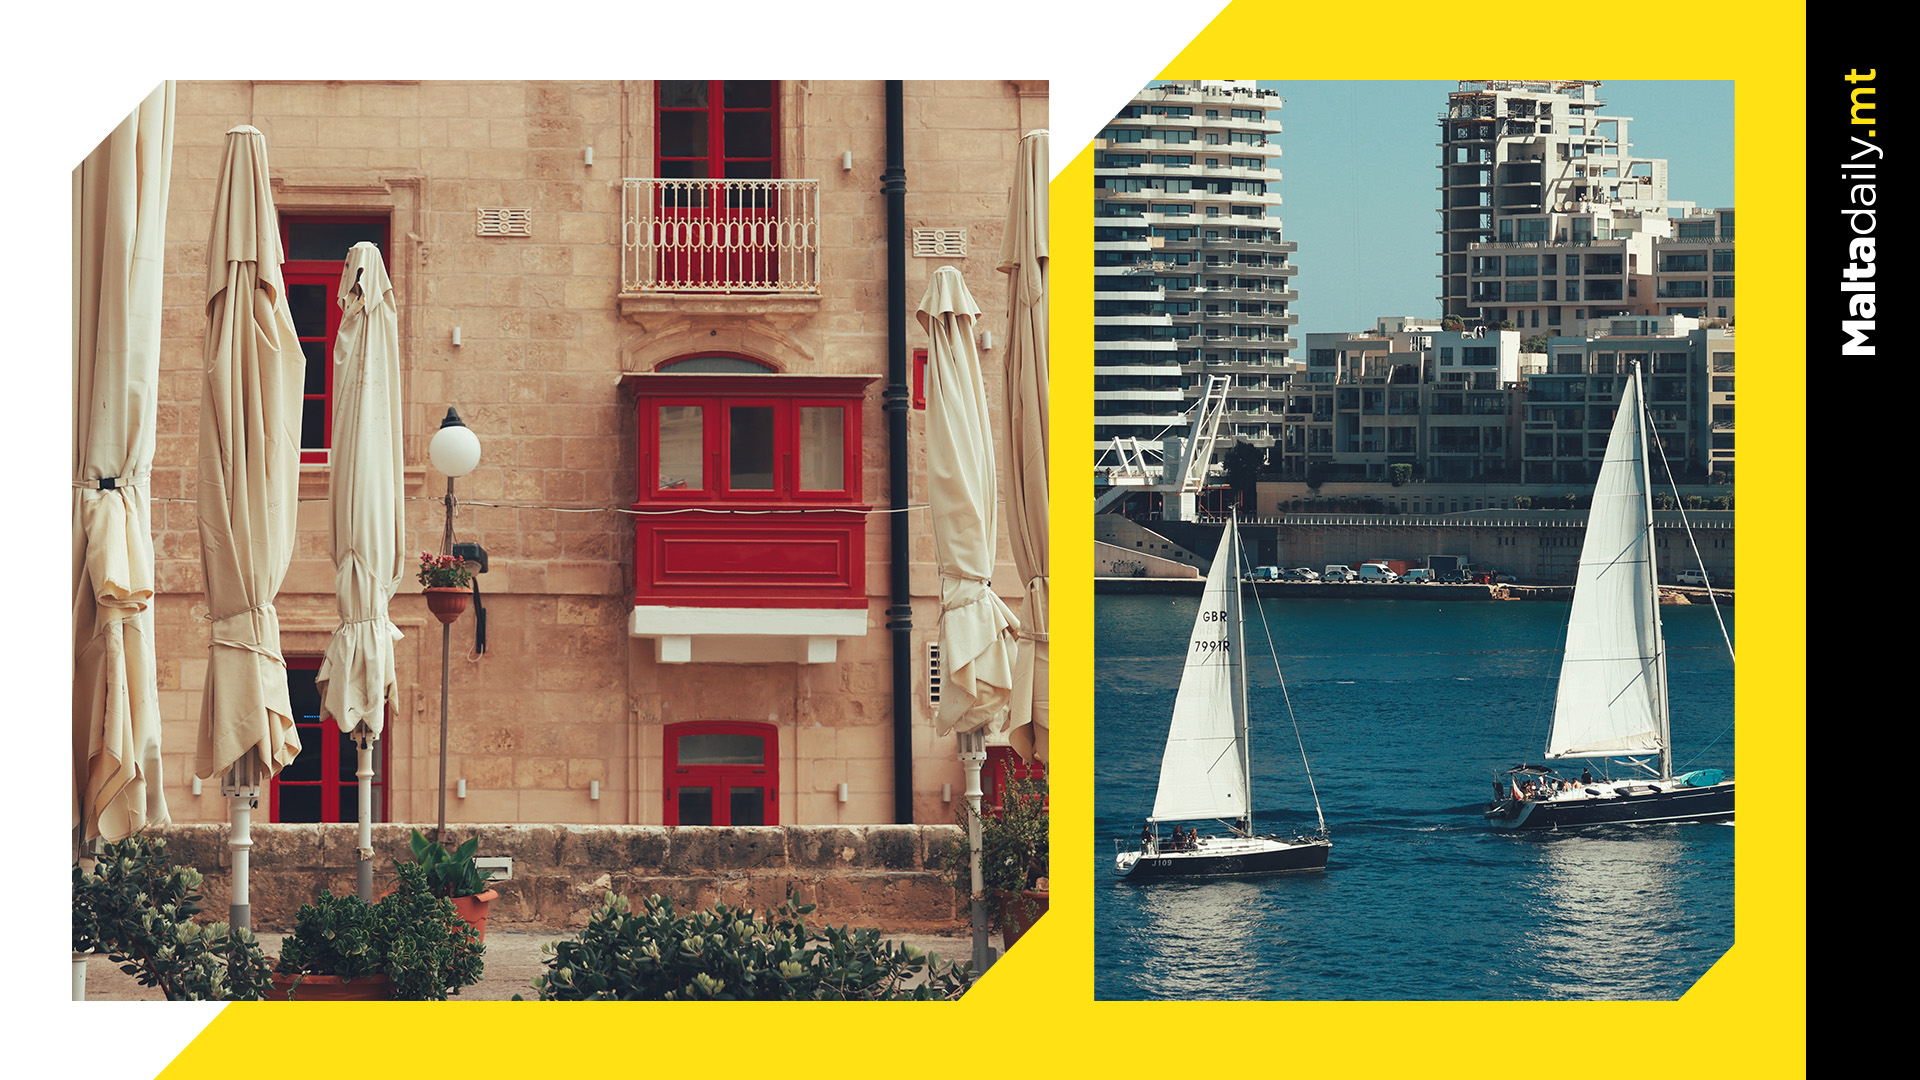 Here's what to do & where to go in Malta according to CNN